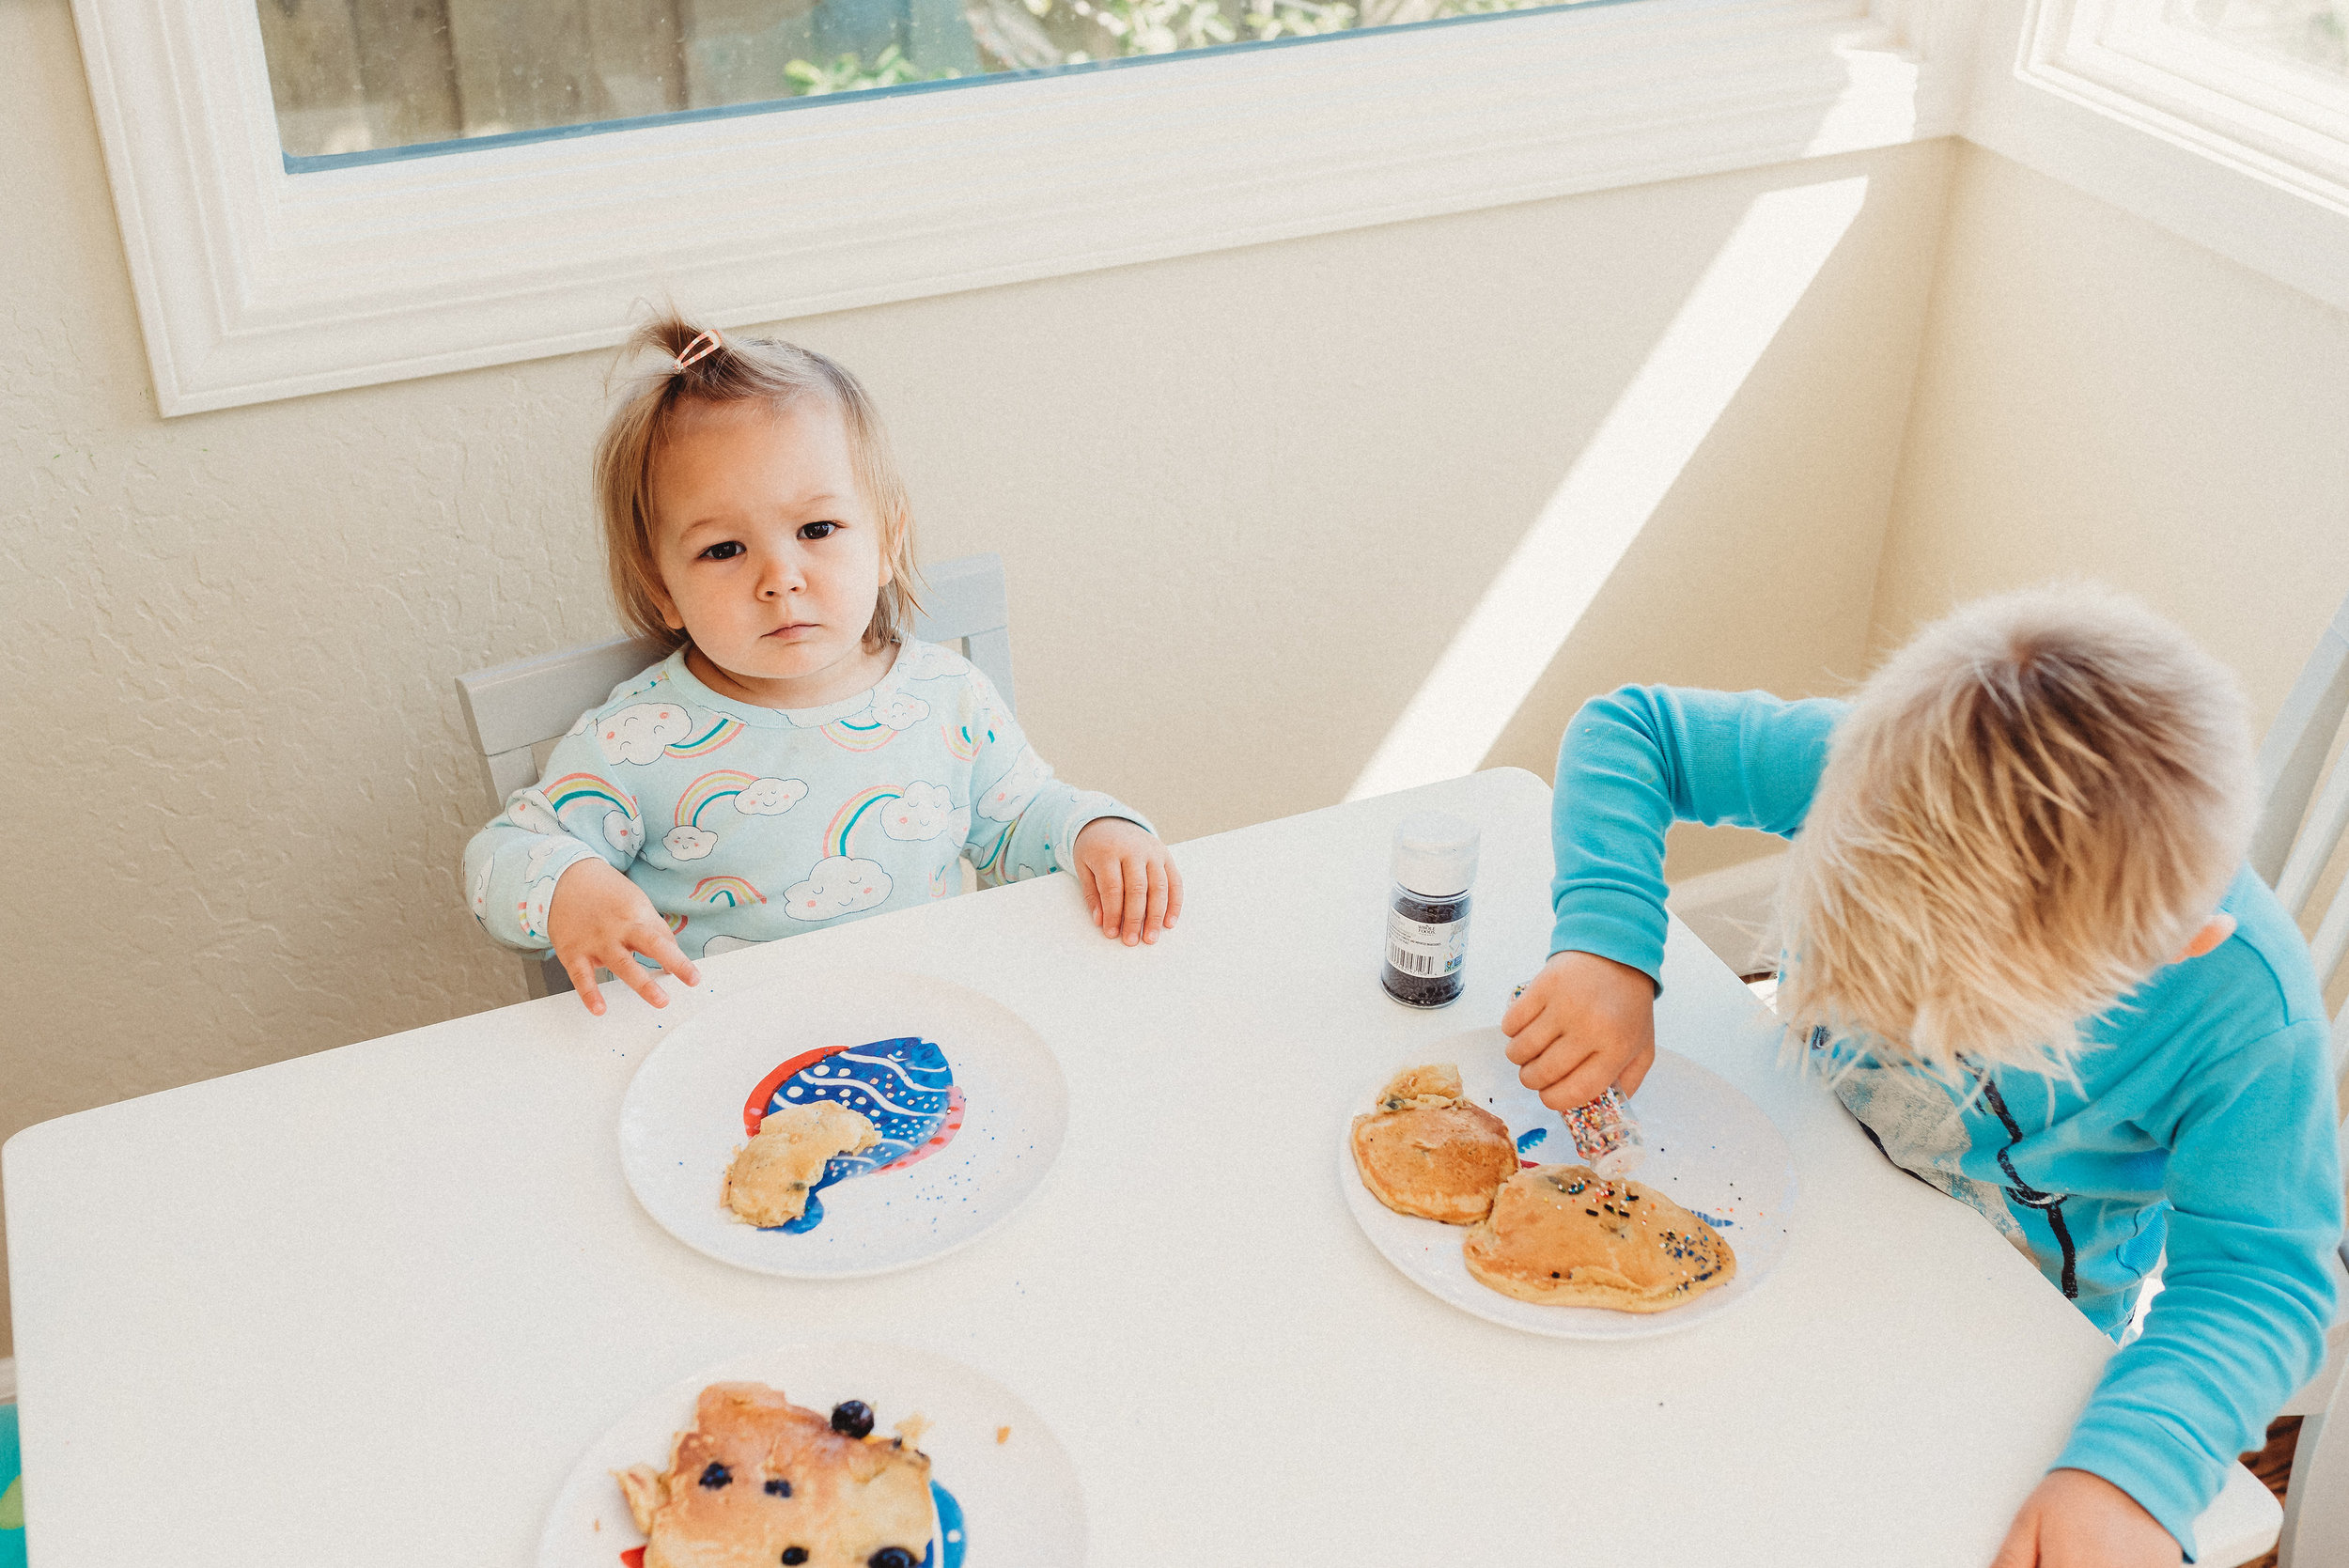 family pancakes morning routine mom of two toddlers pj mornings family time quality time30.jpg